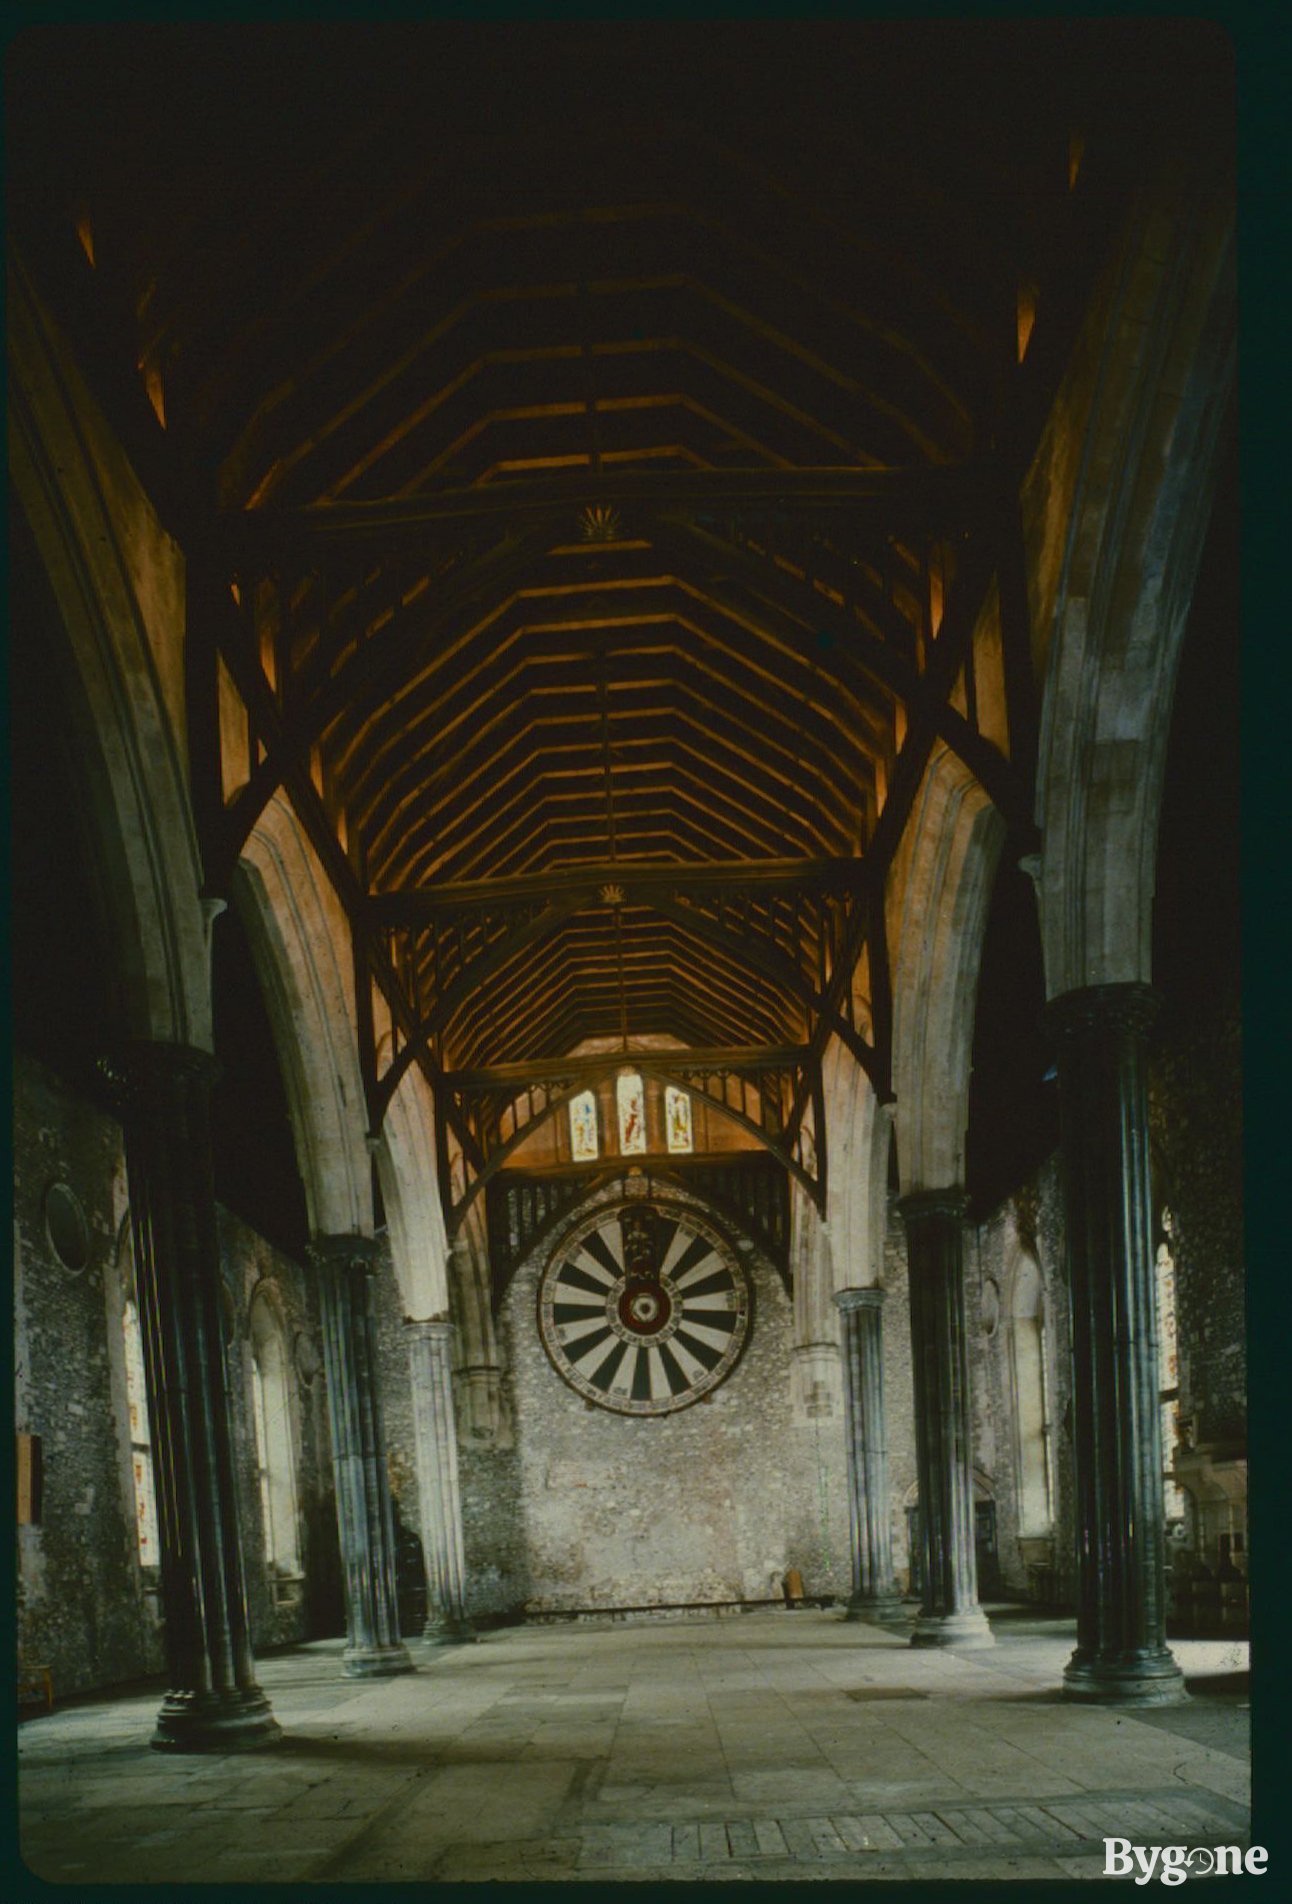 Looking down the centre of a castle’s great hall toward a round black and white table that’s mounted into the centre of a stone wall at the end. There are wooden hexagonal arches overhead and black stone pillars with arches either side of the central walkway.